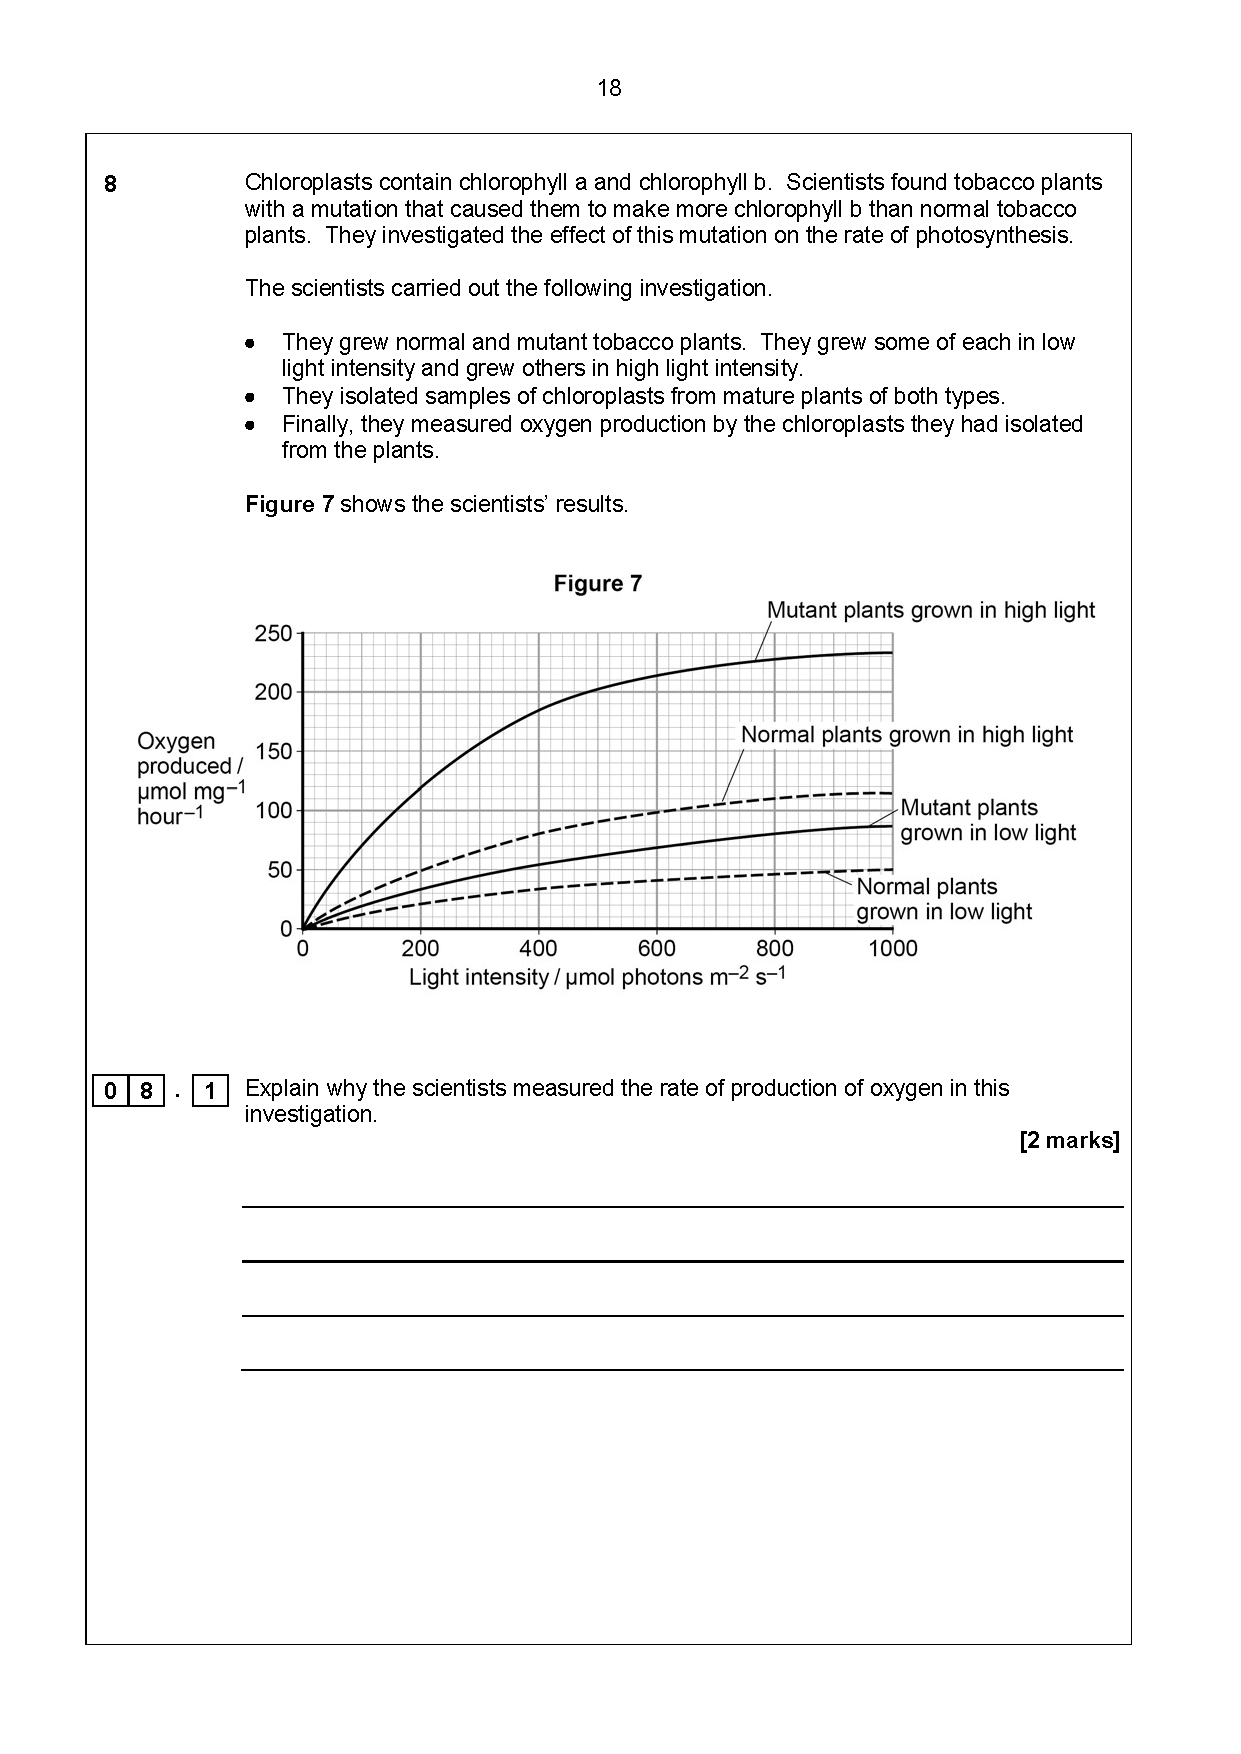 calculationquestionsAQA_Page_01.png